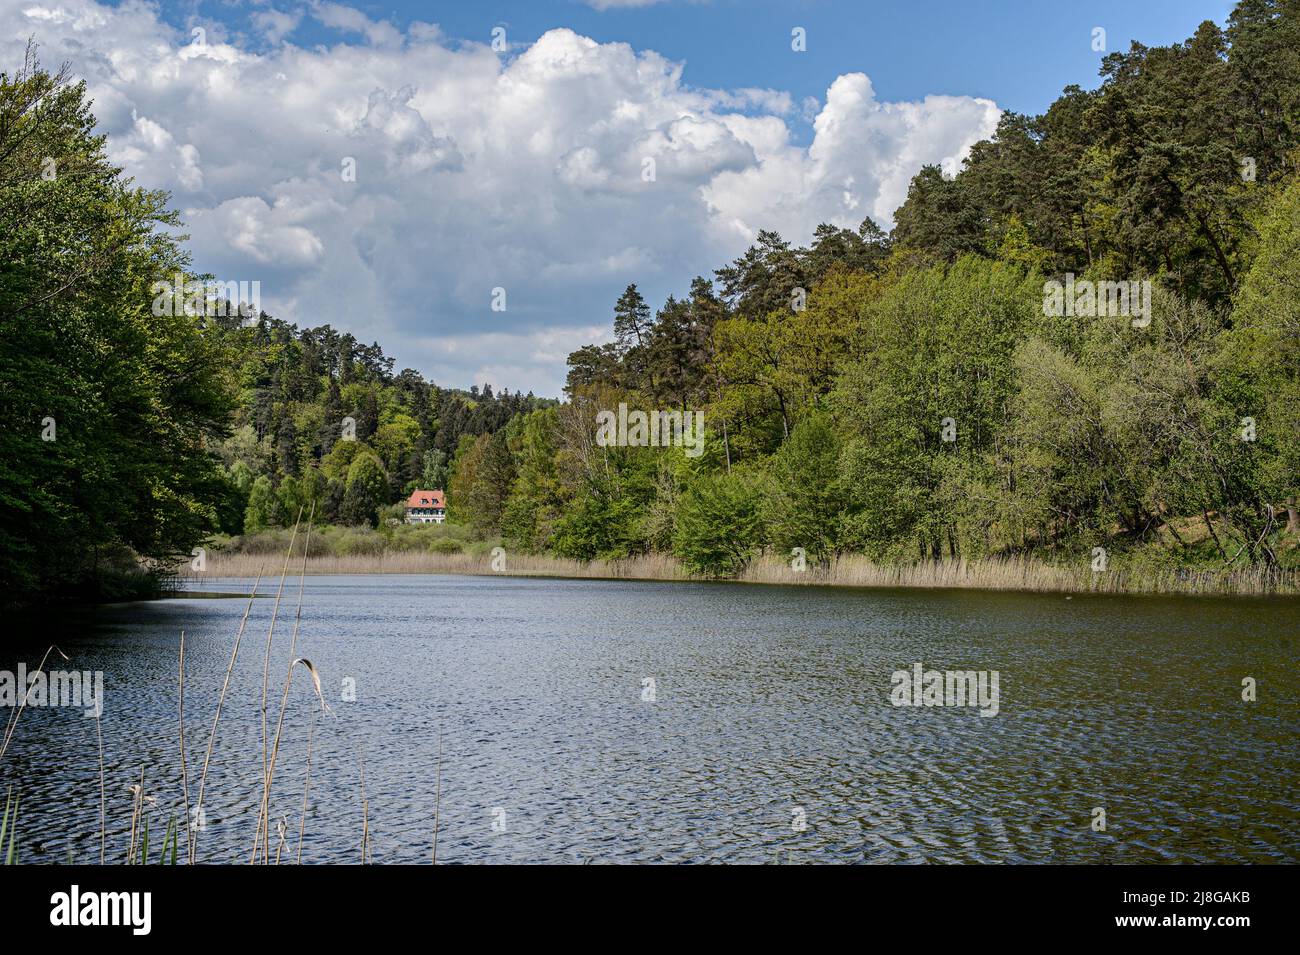 The pond of Wineckerthal and the forest house. The small pond of the Wineckerthal is surrounded by hills whose trees are reflected in the calm water. Stock Photo